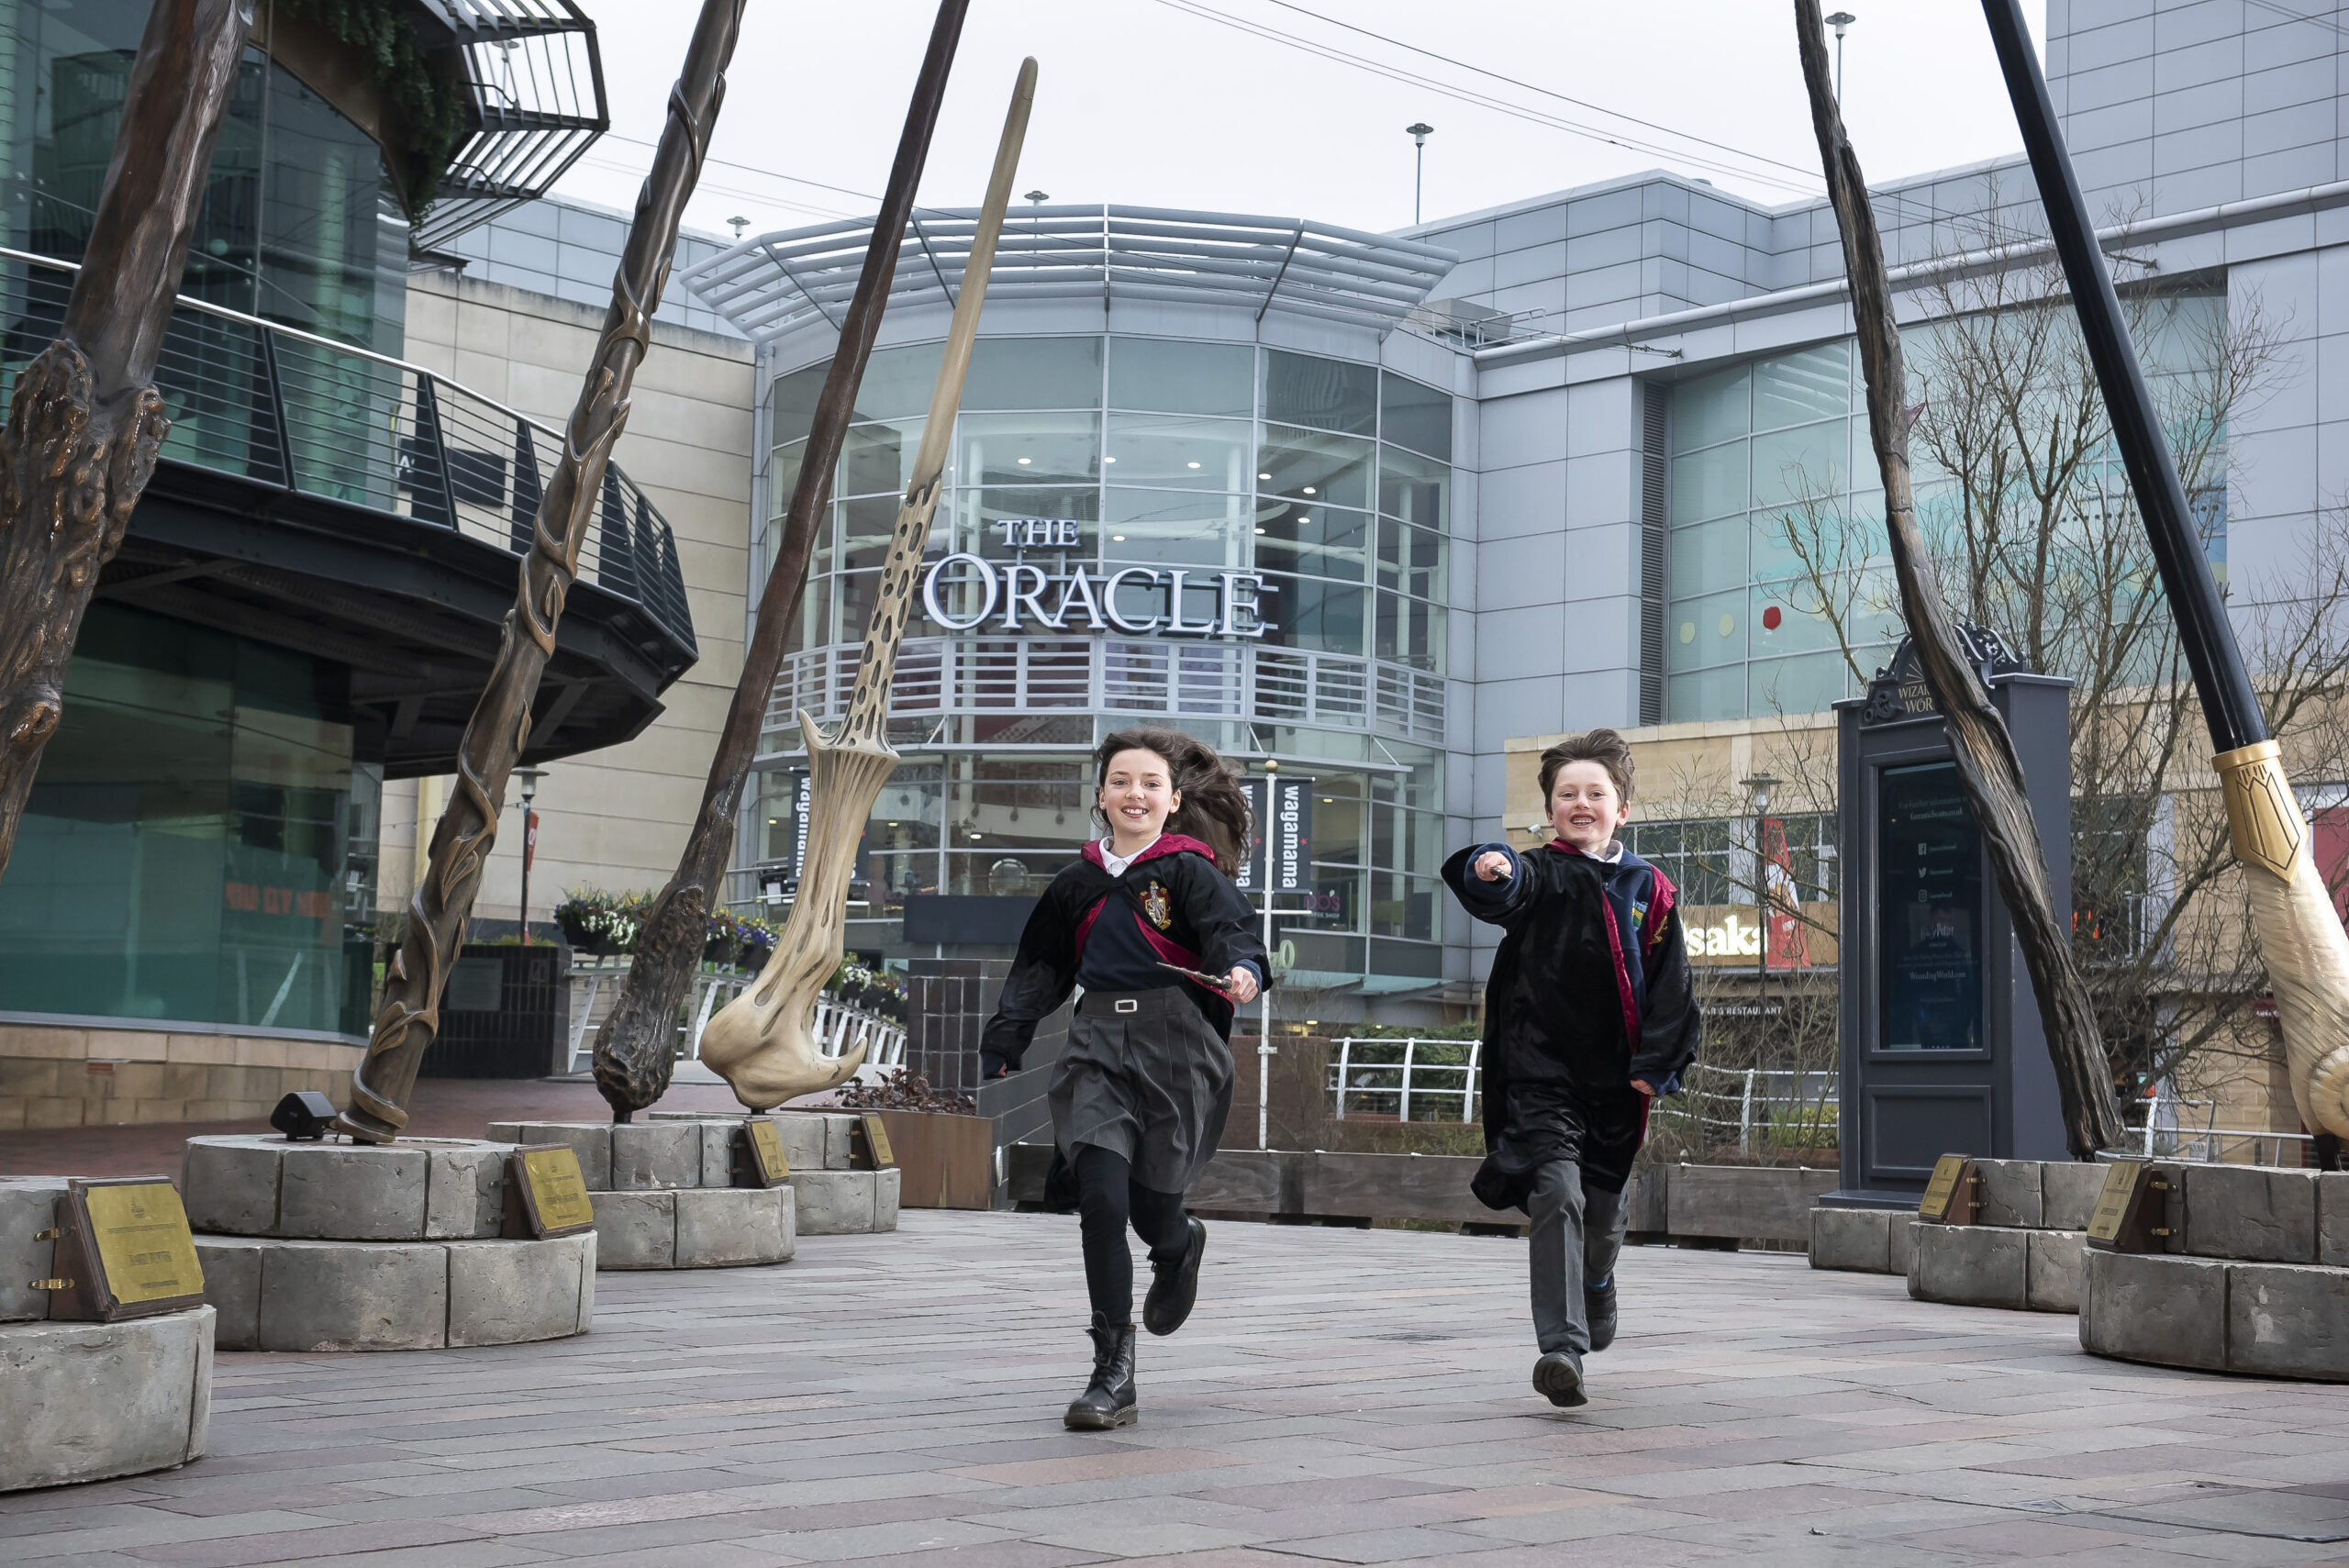 The Wizarding World wand installation has made it to the Oracle Shopping Centre in Reading, its fourth and final stop of the tour.